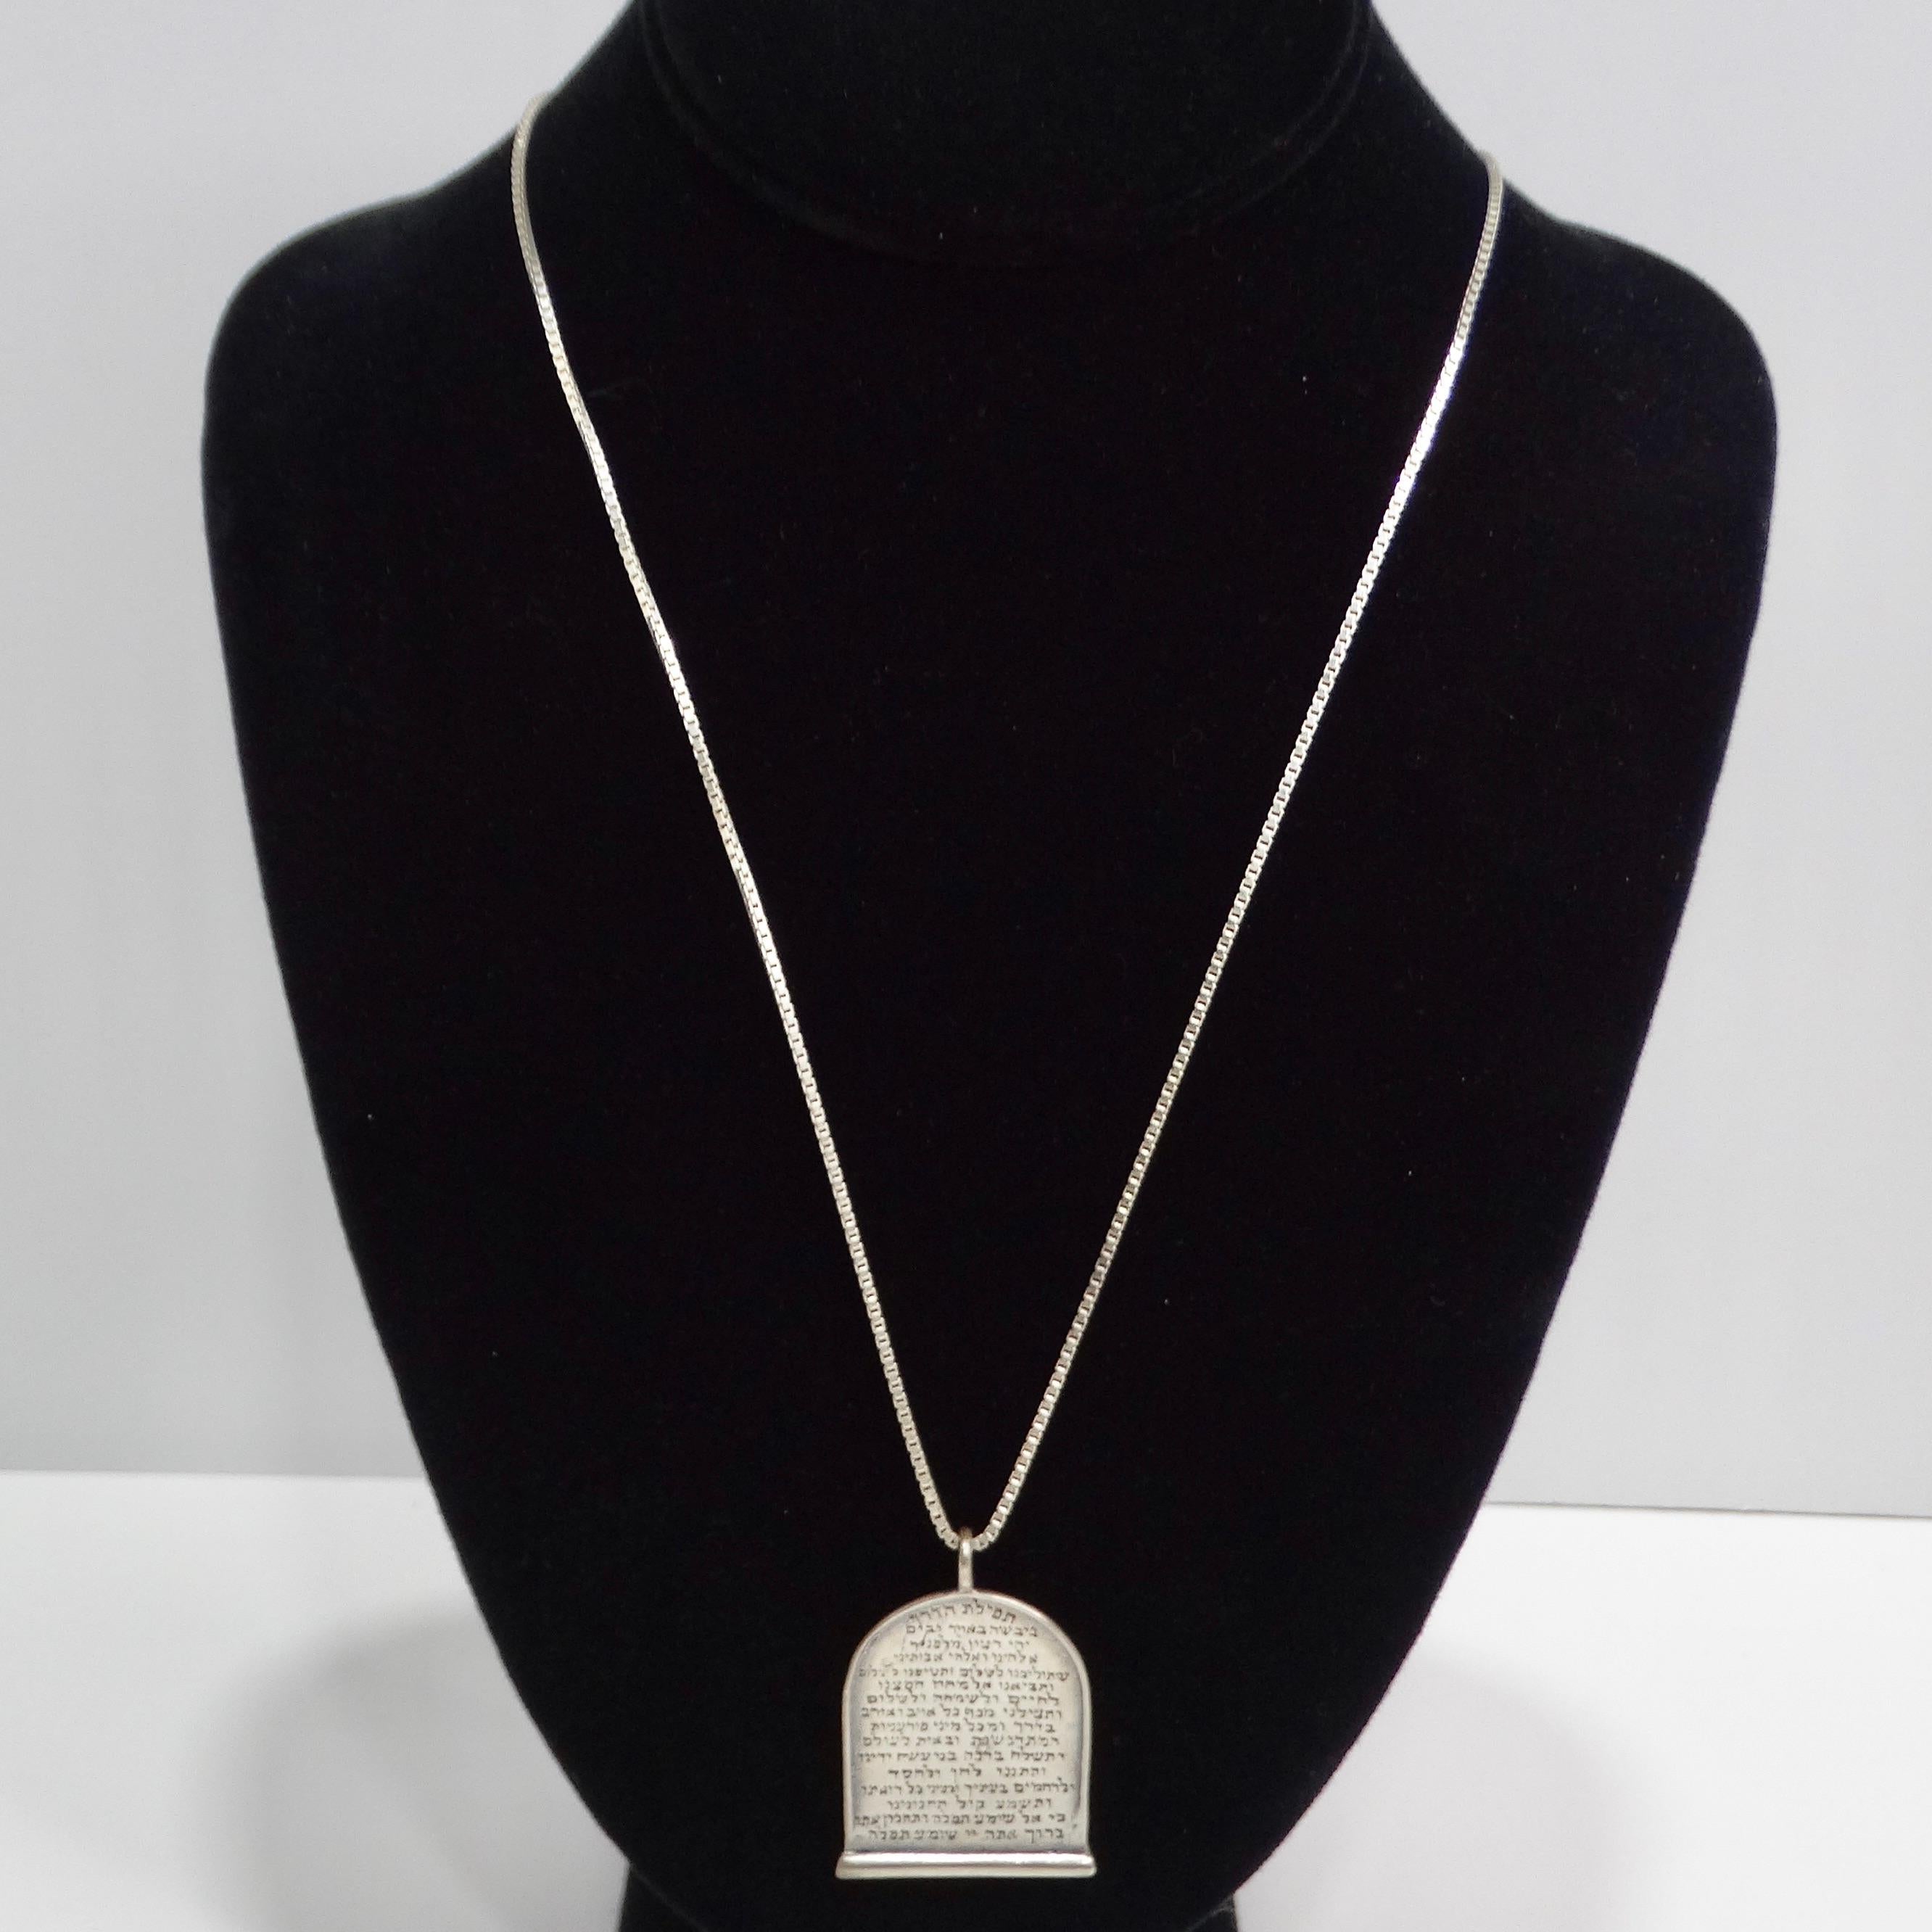 Introducing the 1970s Silver Hebrew Blessing Necklace, a beautiful vintage piece that combines luxury with spiritual significance. This necklace is crafted from high-quality silver 925 and features a pendant inscribed with the Hebrew text of the